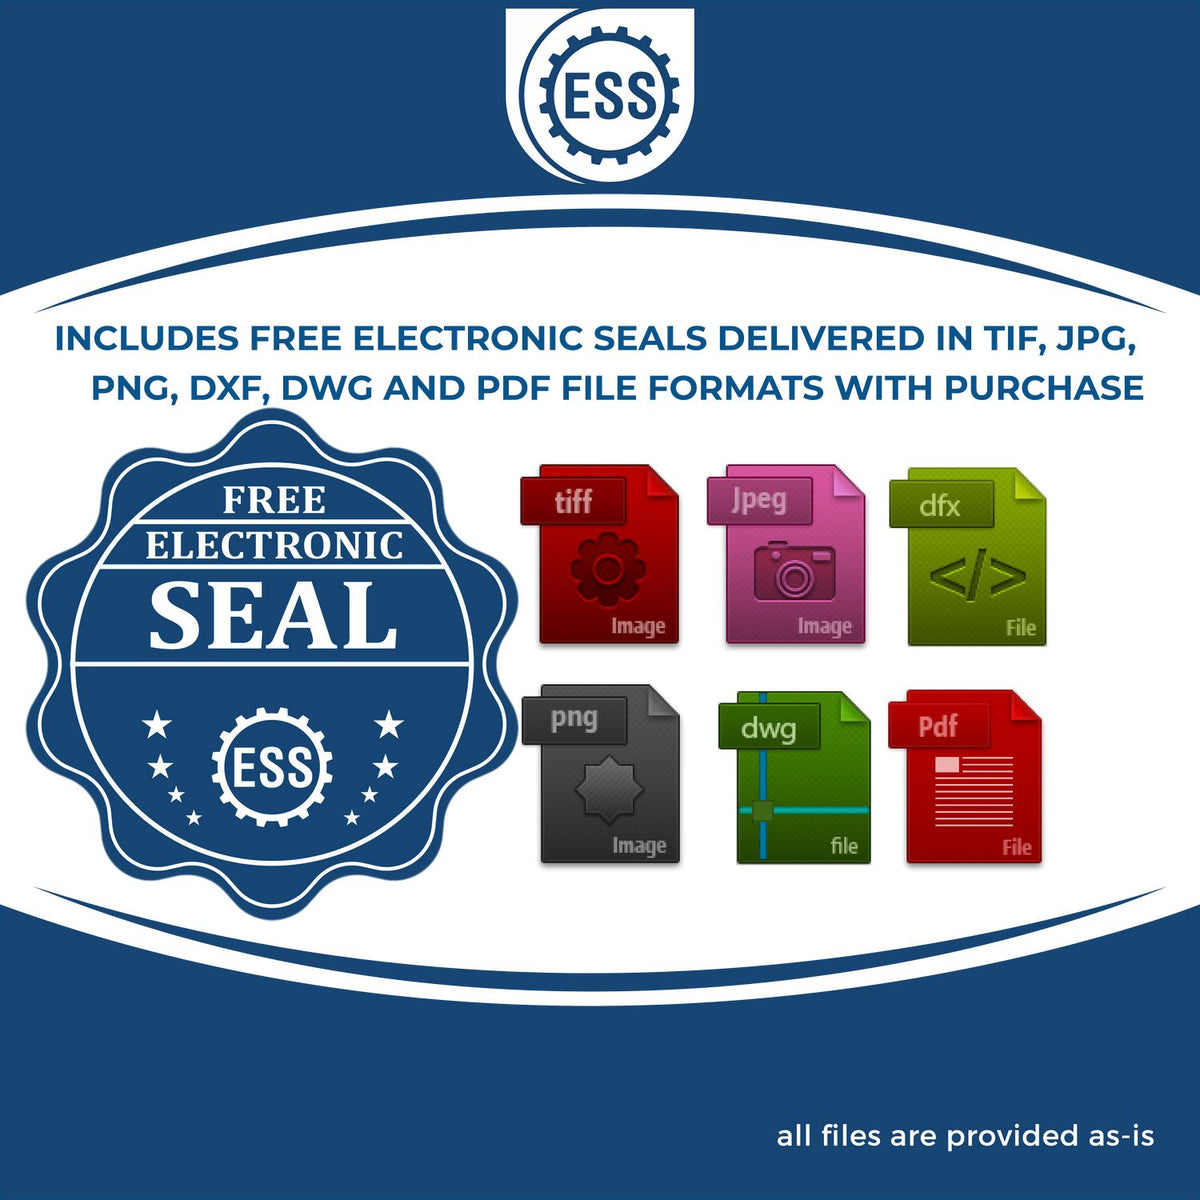 An infographic for the free electronic seal for the Extended Long Reach Maryland Surveyor Embosser illustrating the different file type icons such as DXF, DWG, TIF, JPG and PNG.